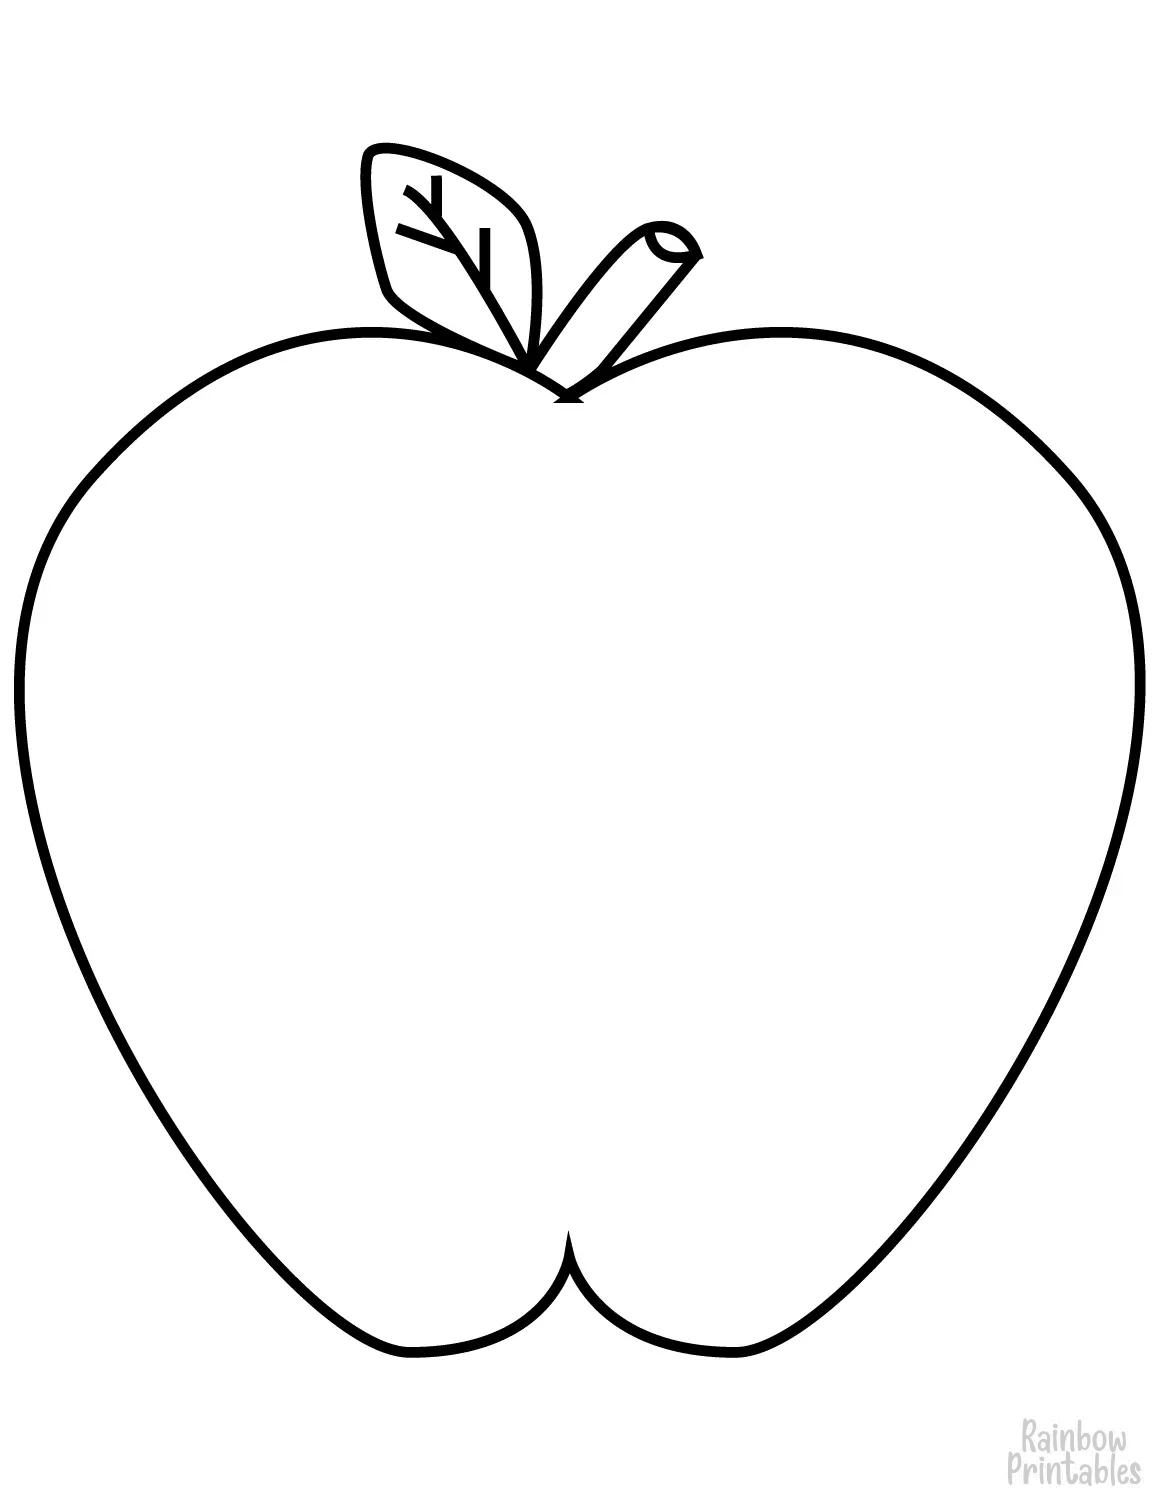 FRUIT APPLE Clipart Coloring Pages Line Art Drawings for Kids-01